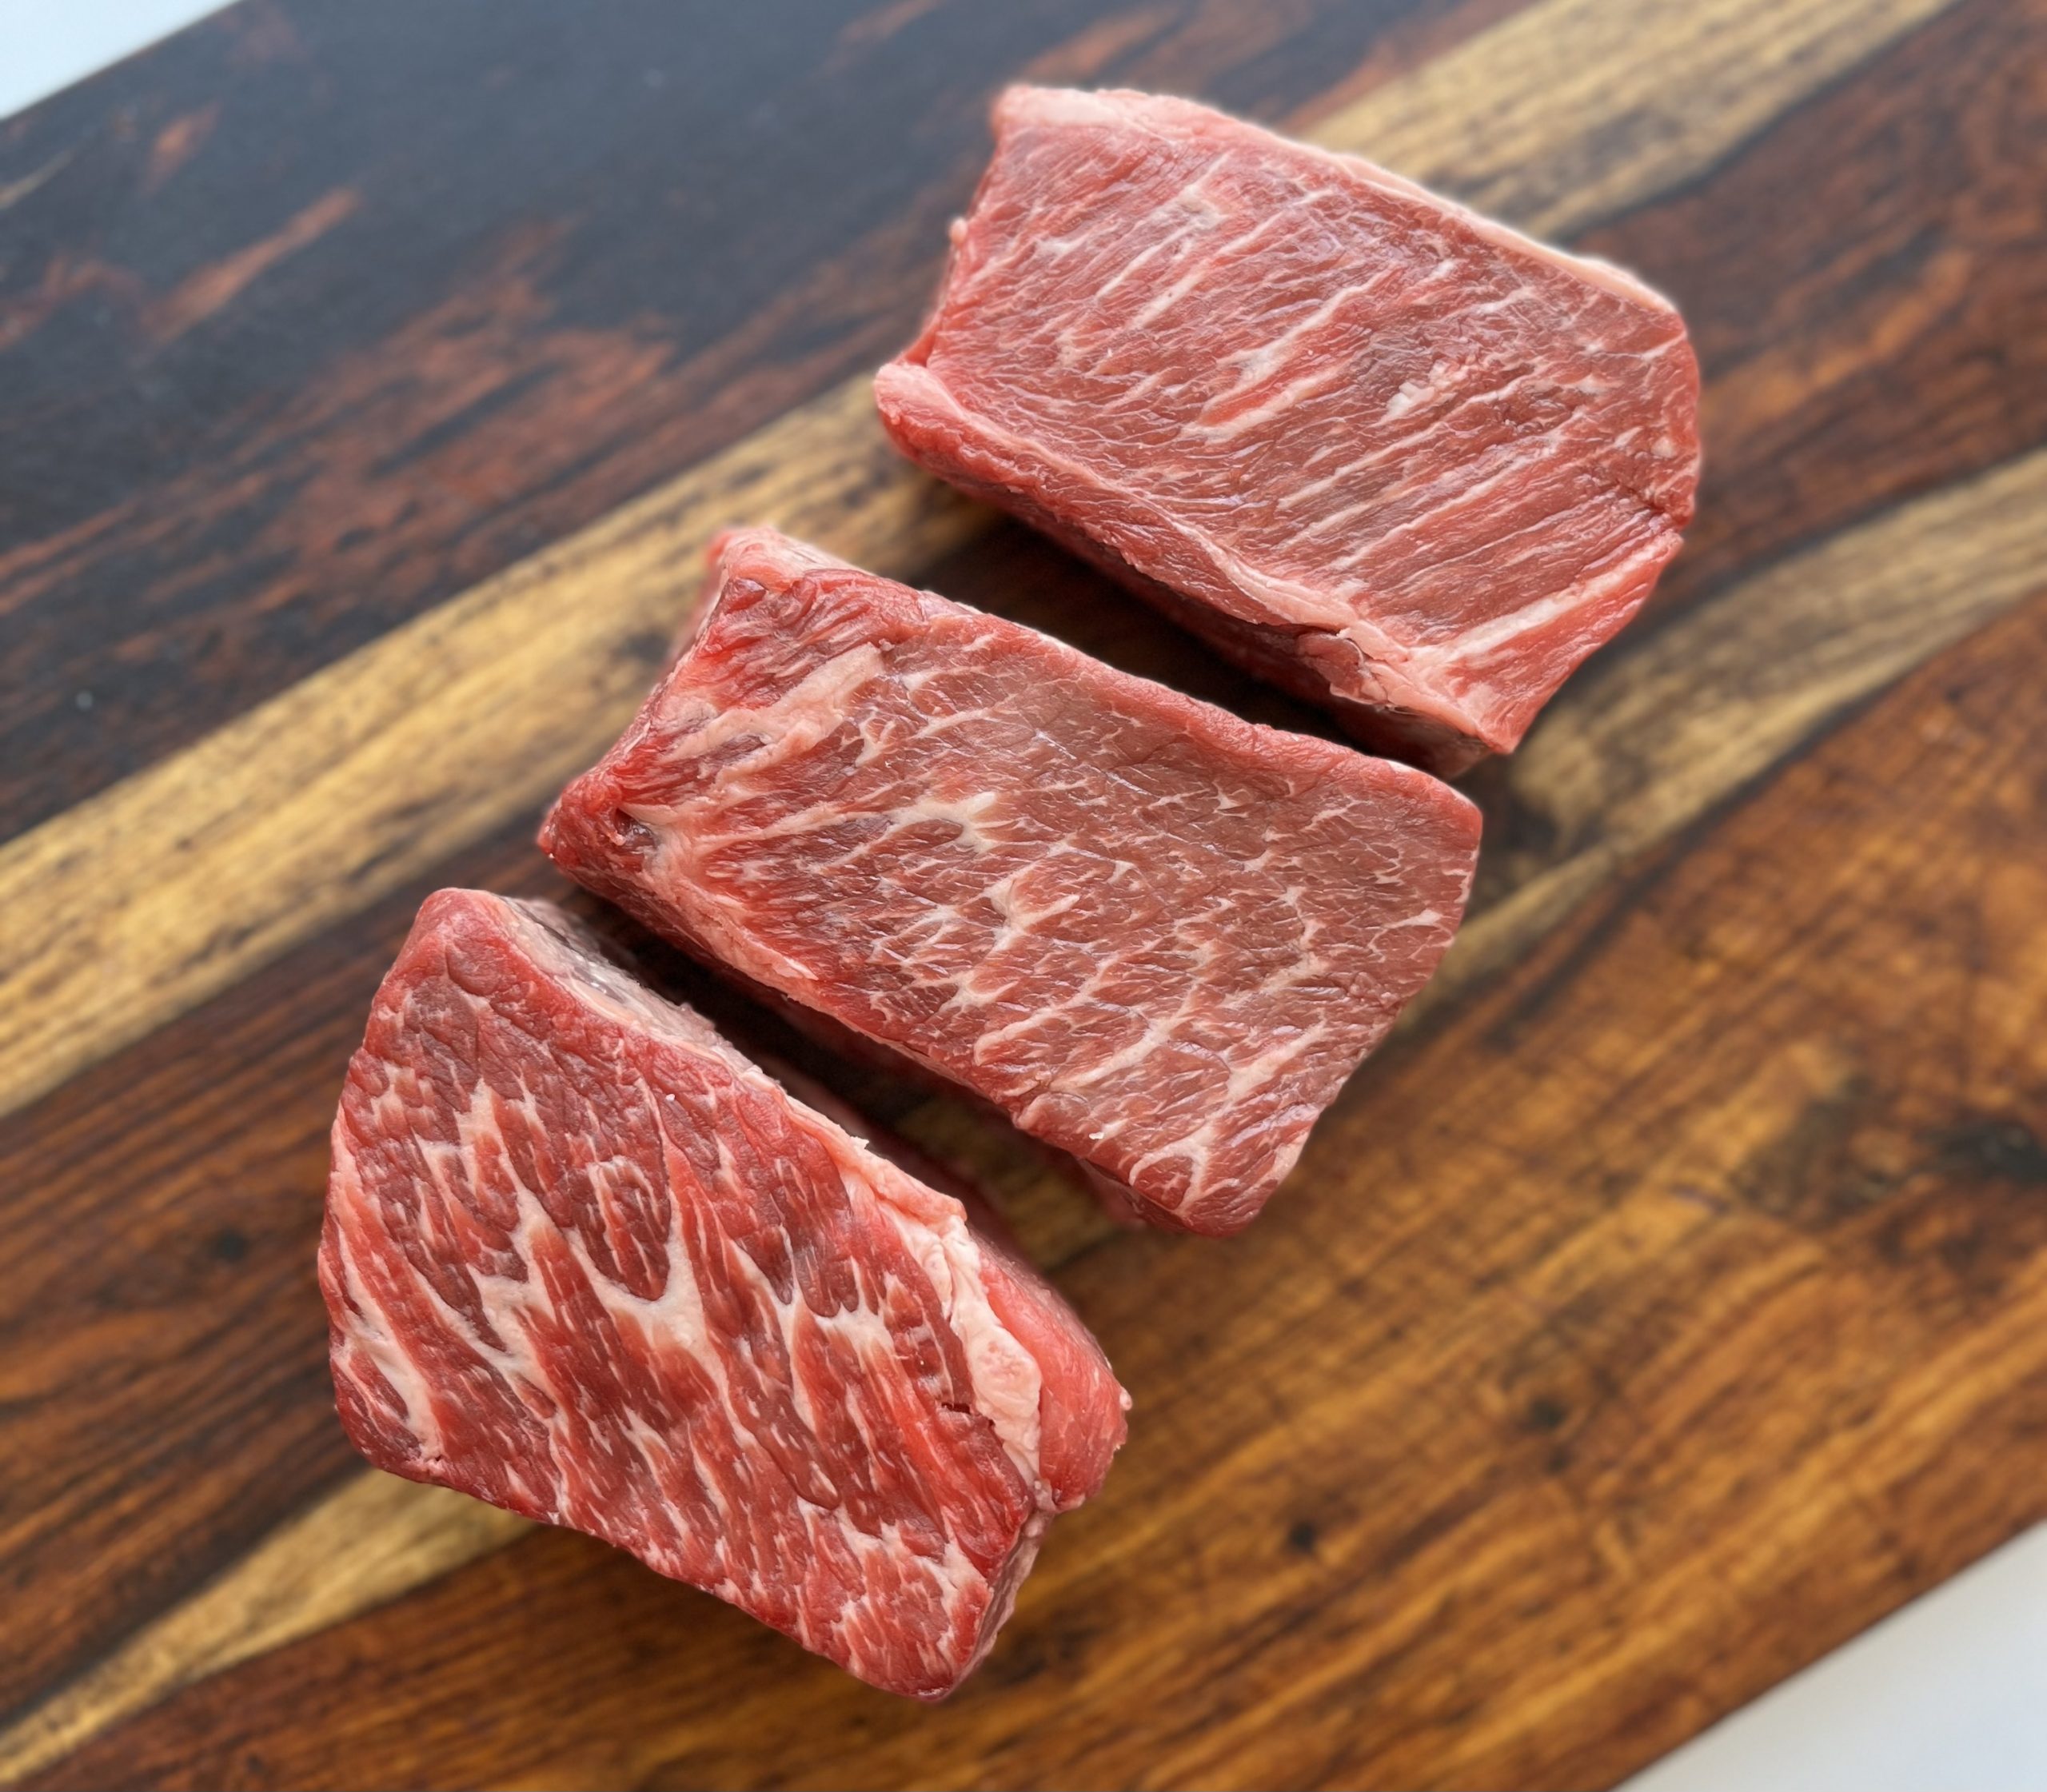 boneless short ribs. Available in premium choice only.